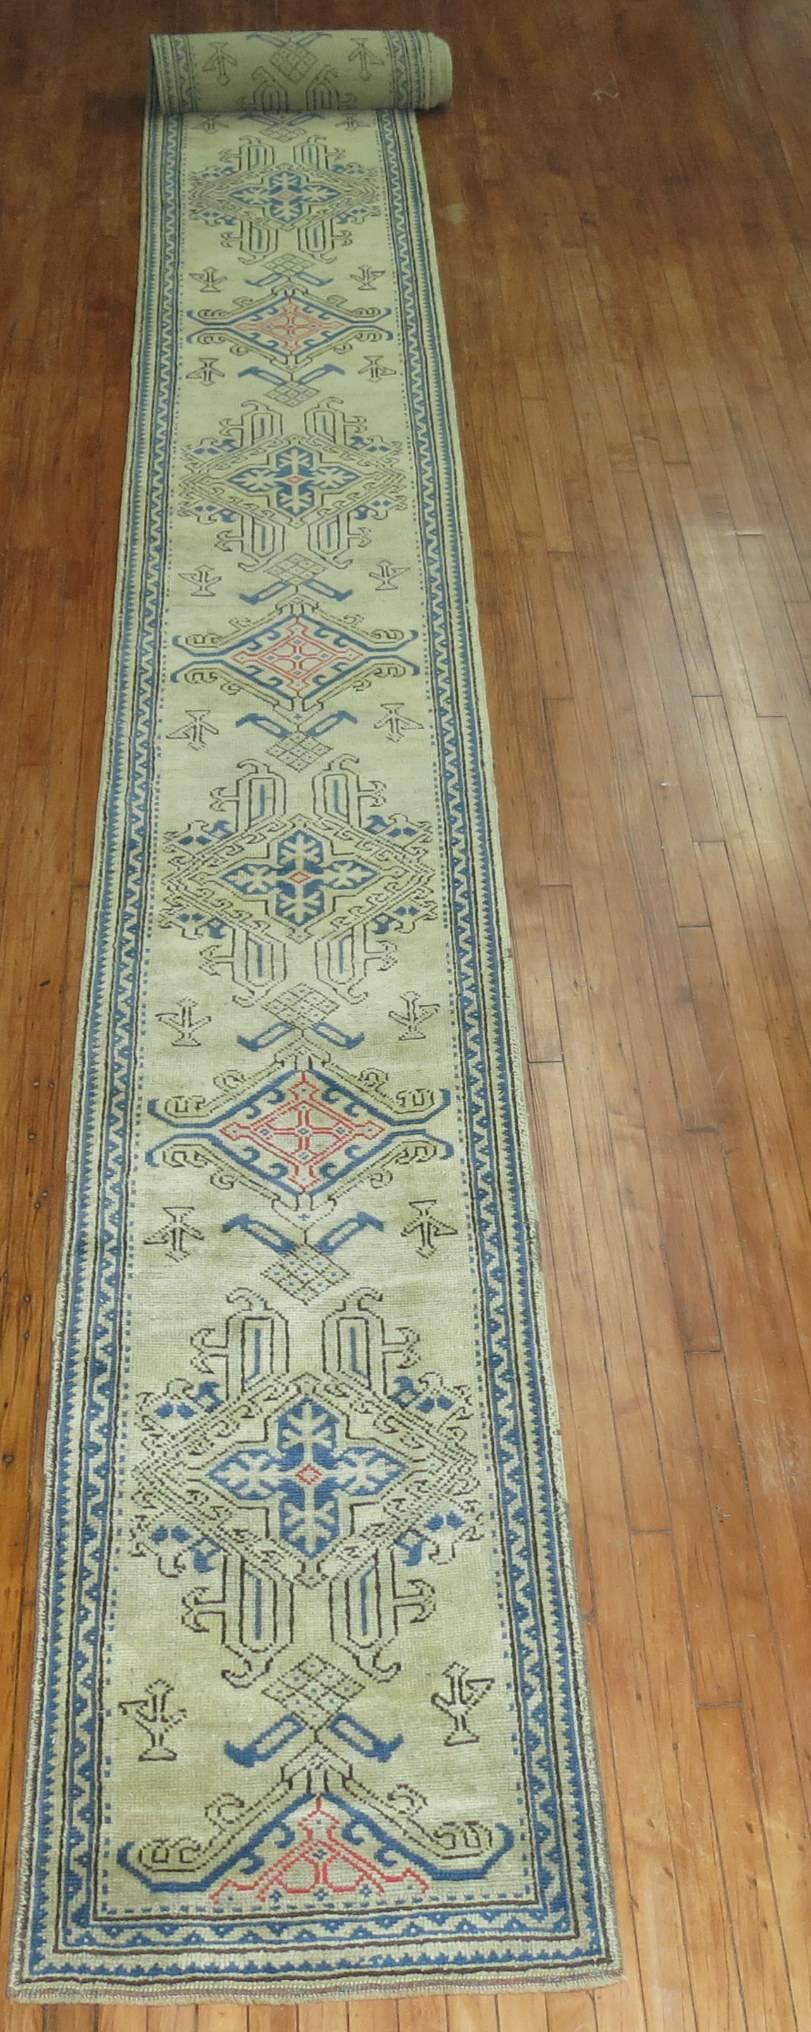 Long and narrow antique Oushak runner in blues, pinks on bone colored field. Close to 35 ft long.